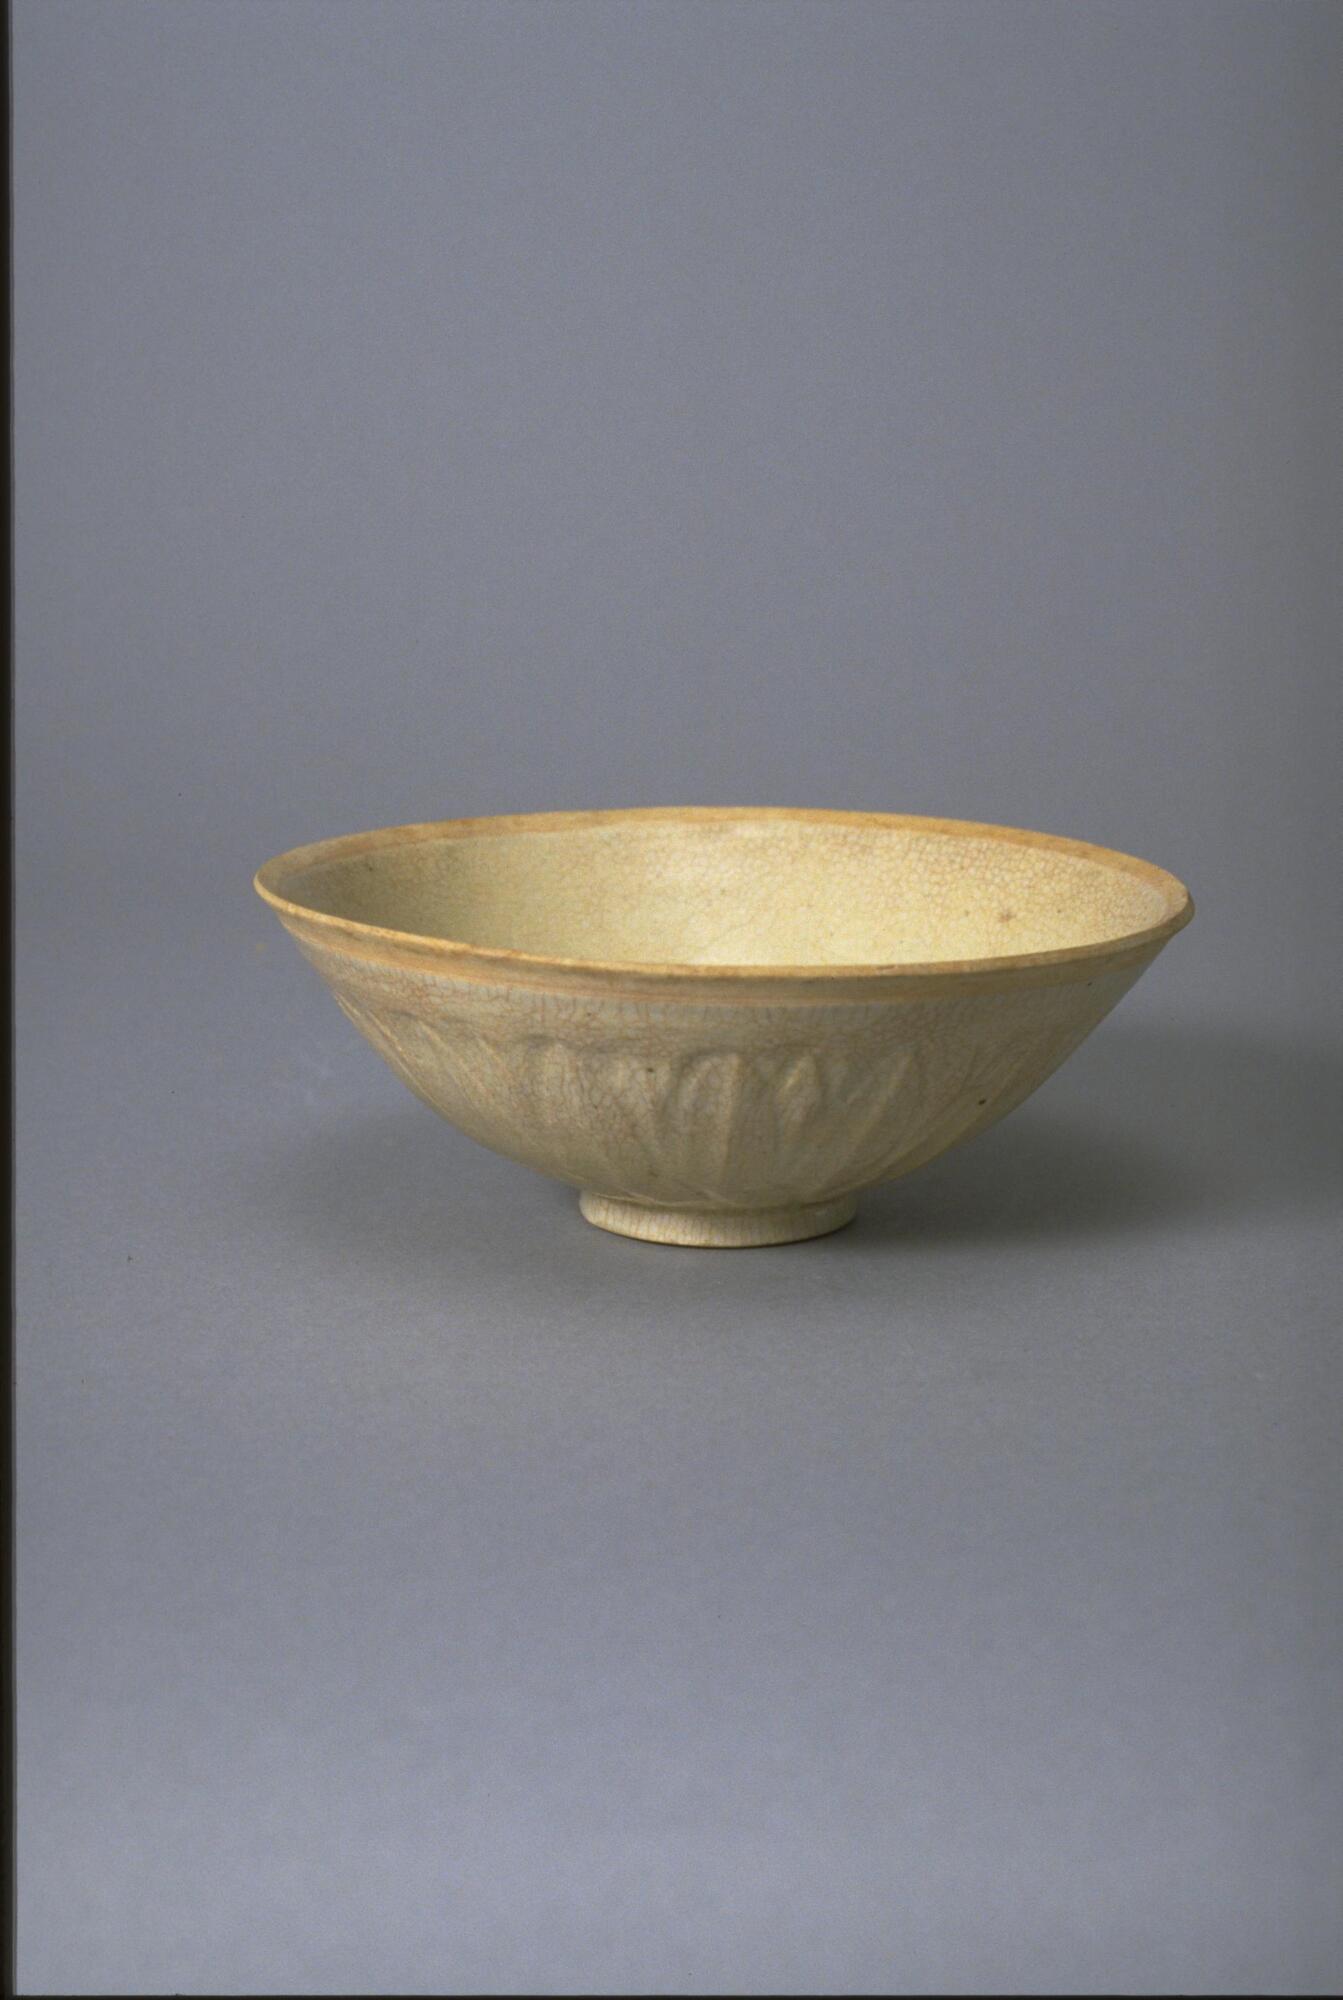 This thin porcelain conical bowl with direct rim on a footring has an exterior carved with lotus petal decoration.  It is covered in a white glaze with bluish tinge, and the rim is unglazed.